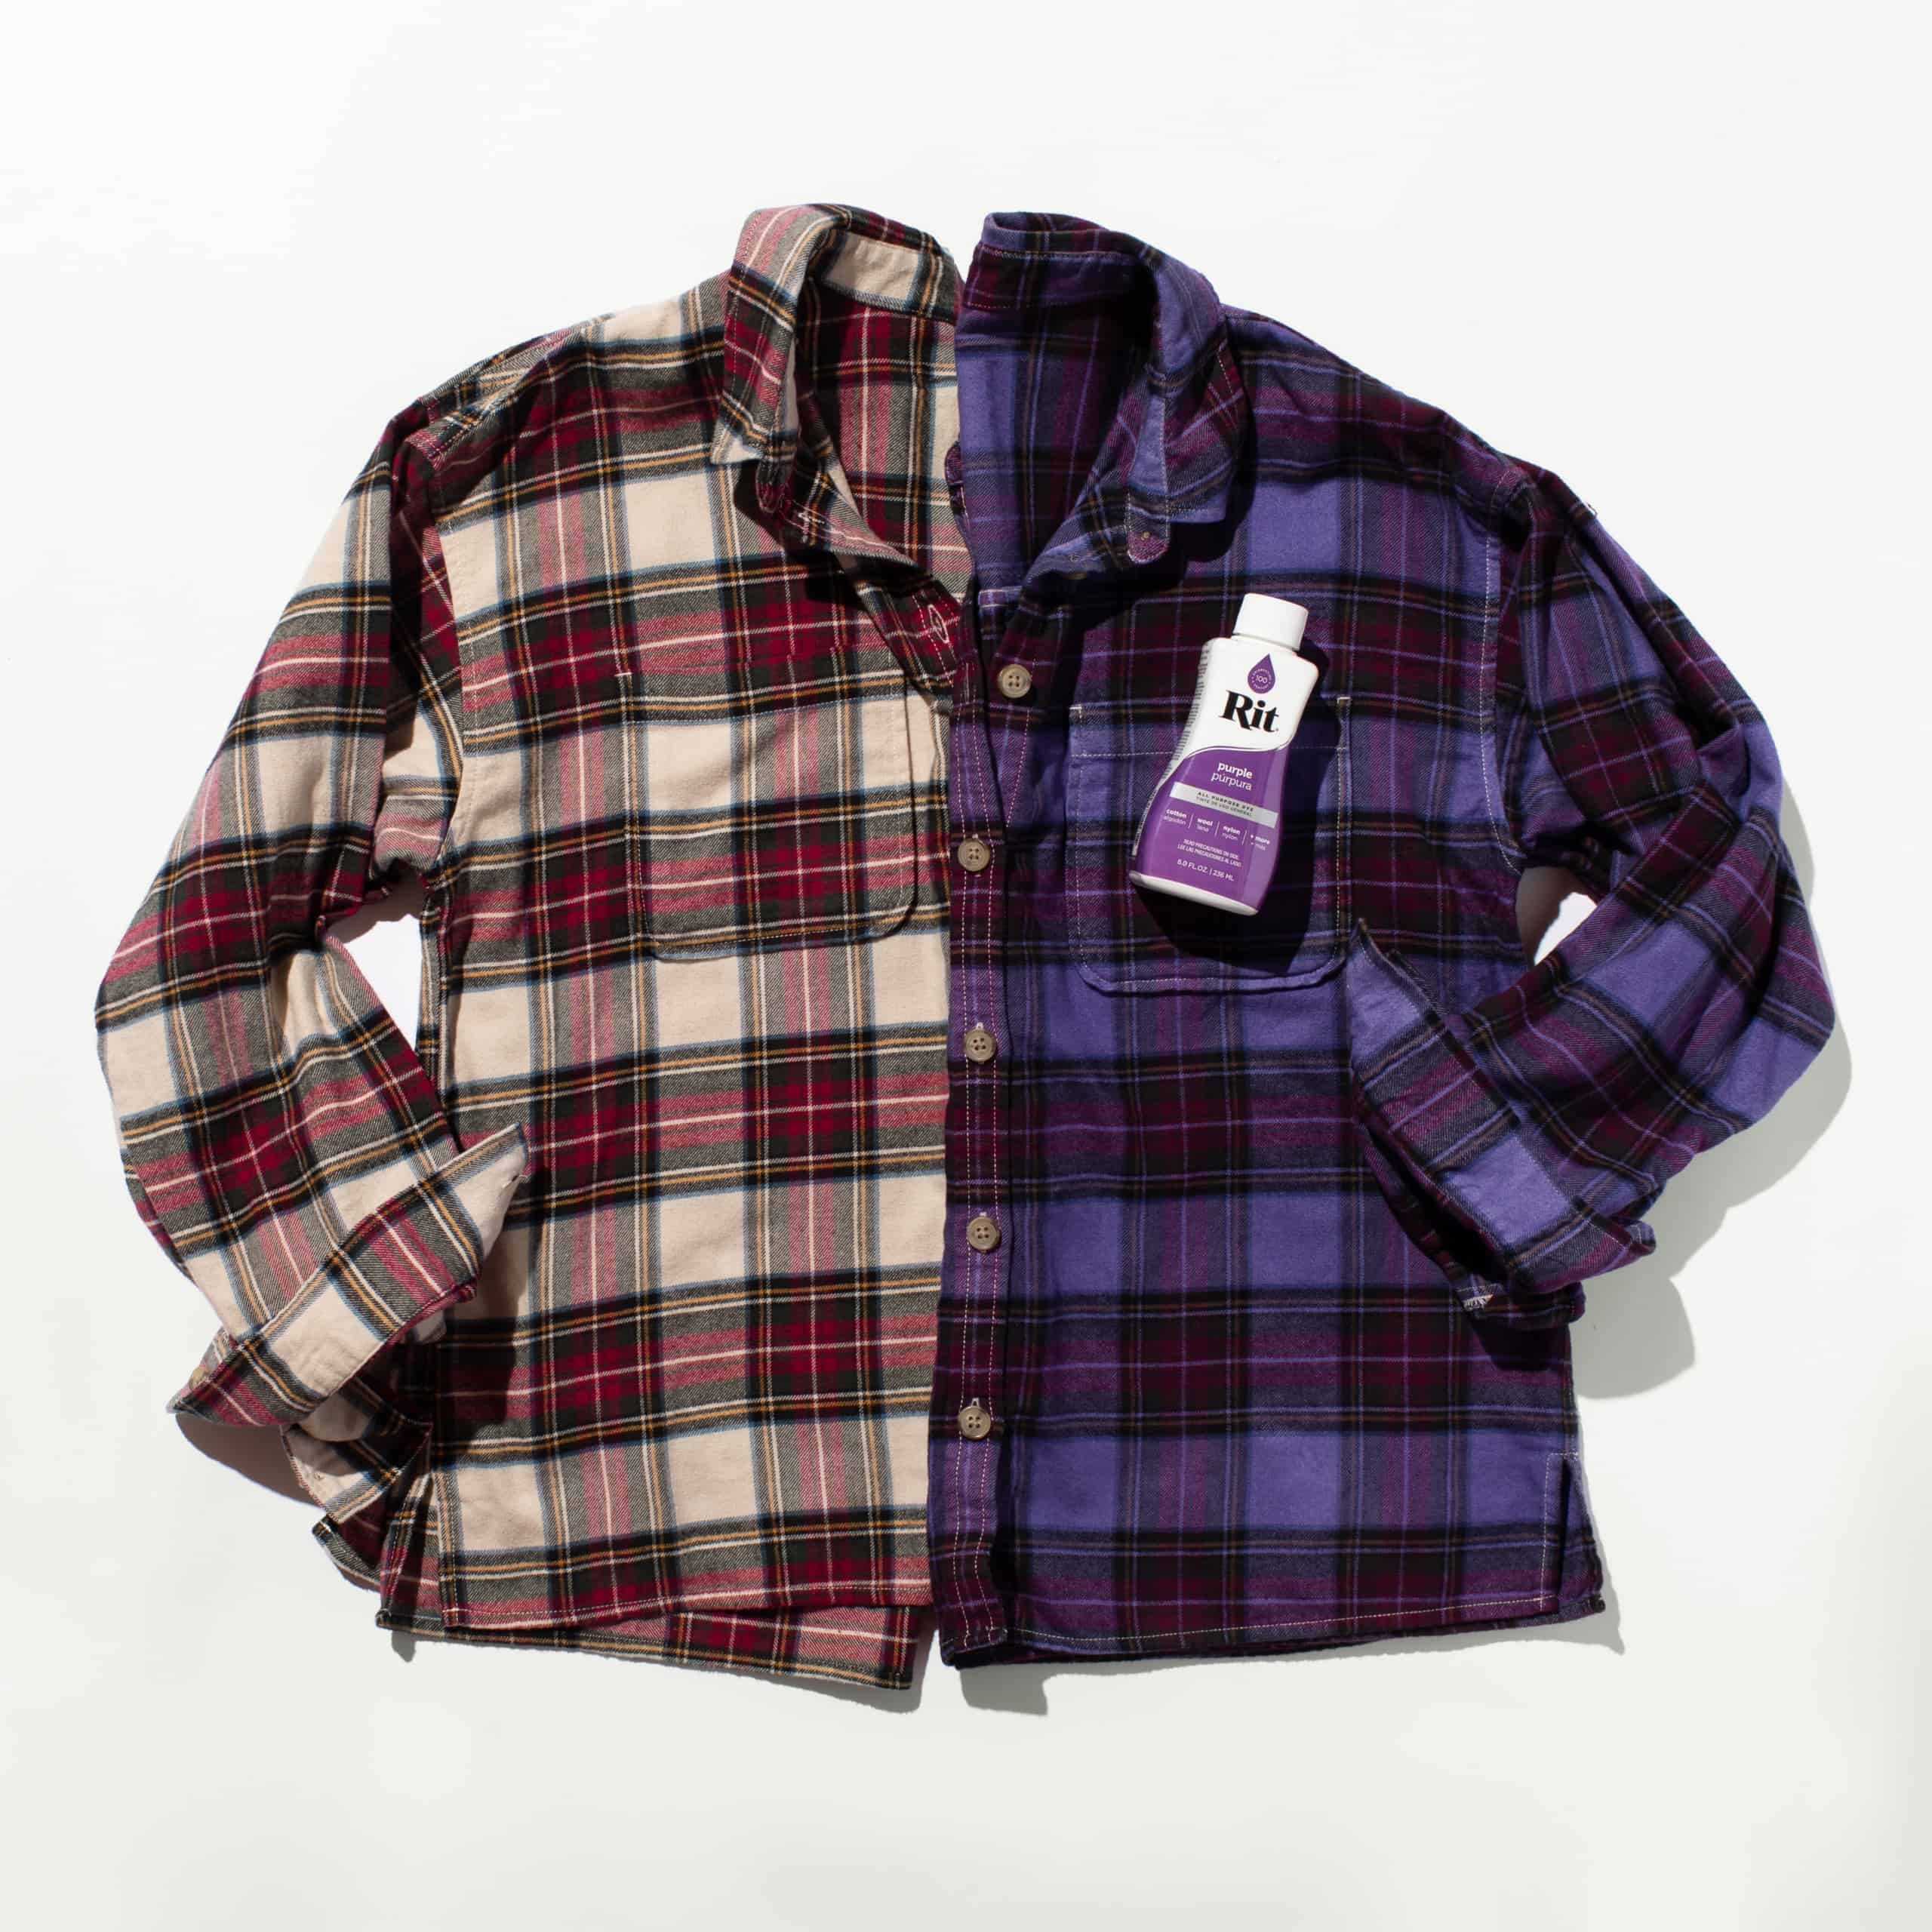 https://www.ritdye.com/wp-content/uploads/2020/02/overdyed-flannel-scaled.jpg